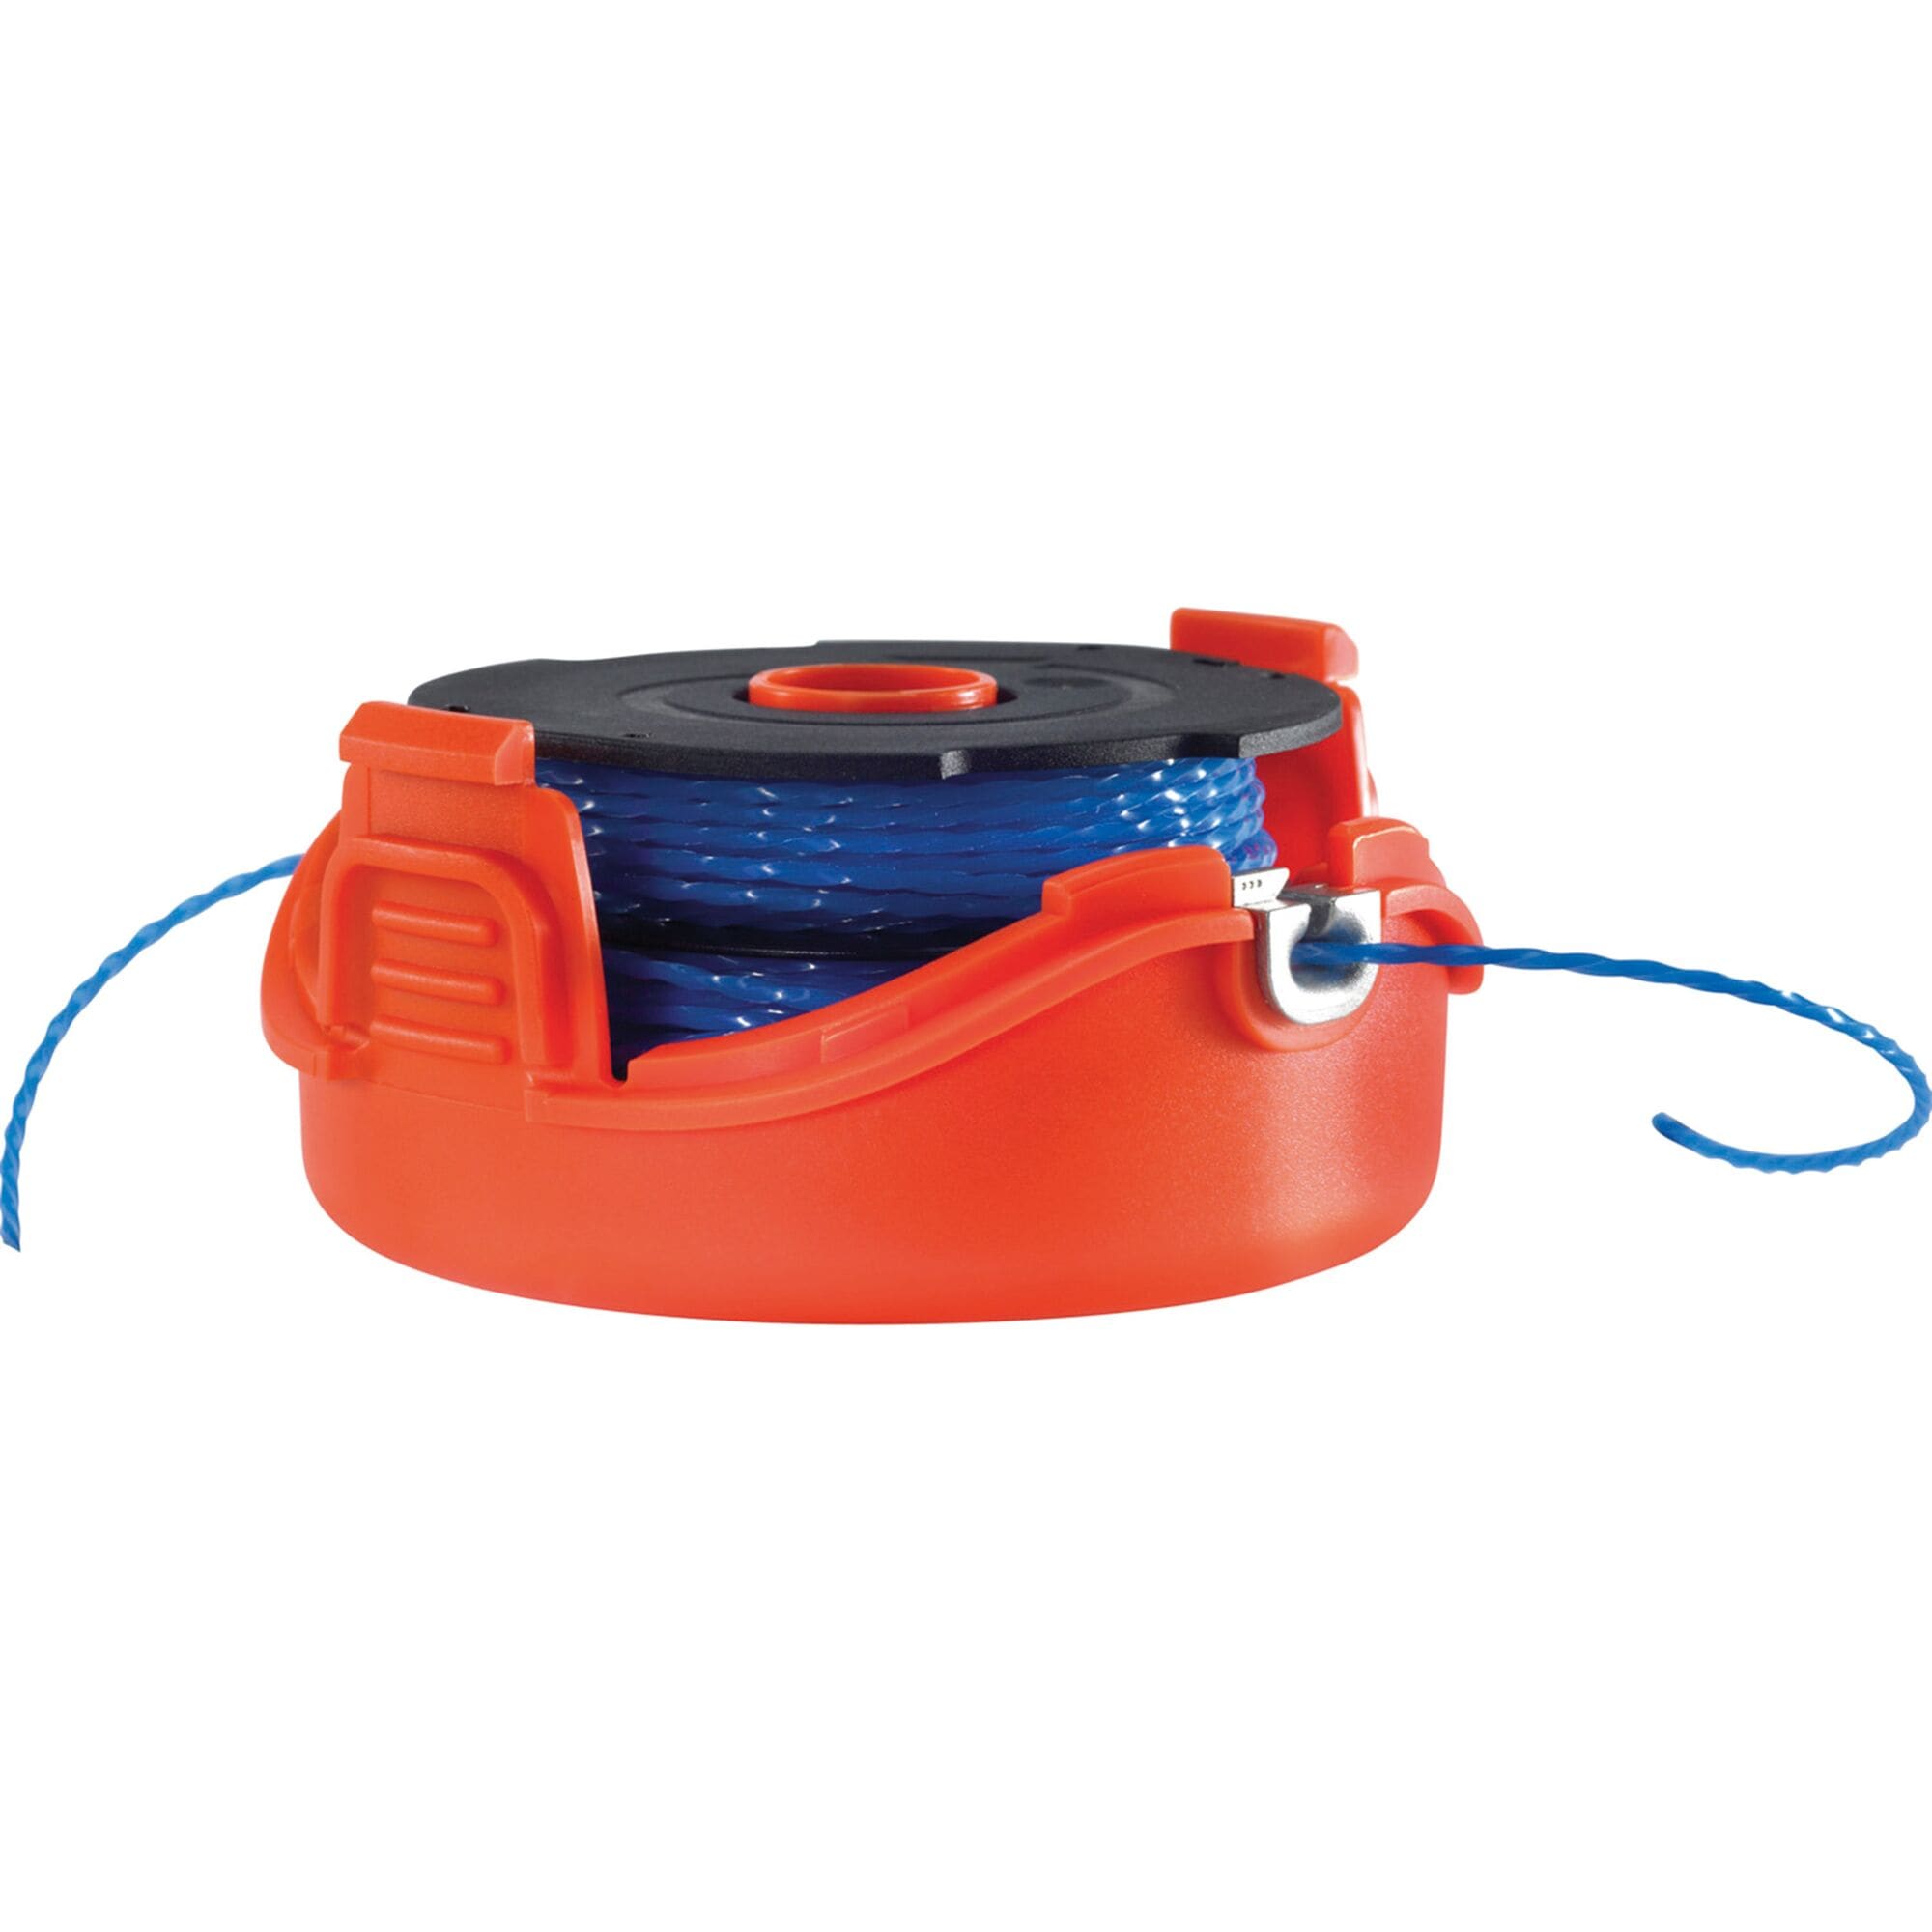 MasterPart Spool & Line For Black Pack of 2 Decker Reflex Strimmers 